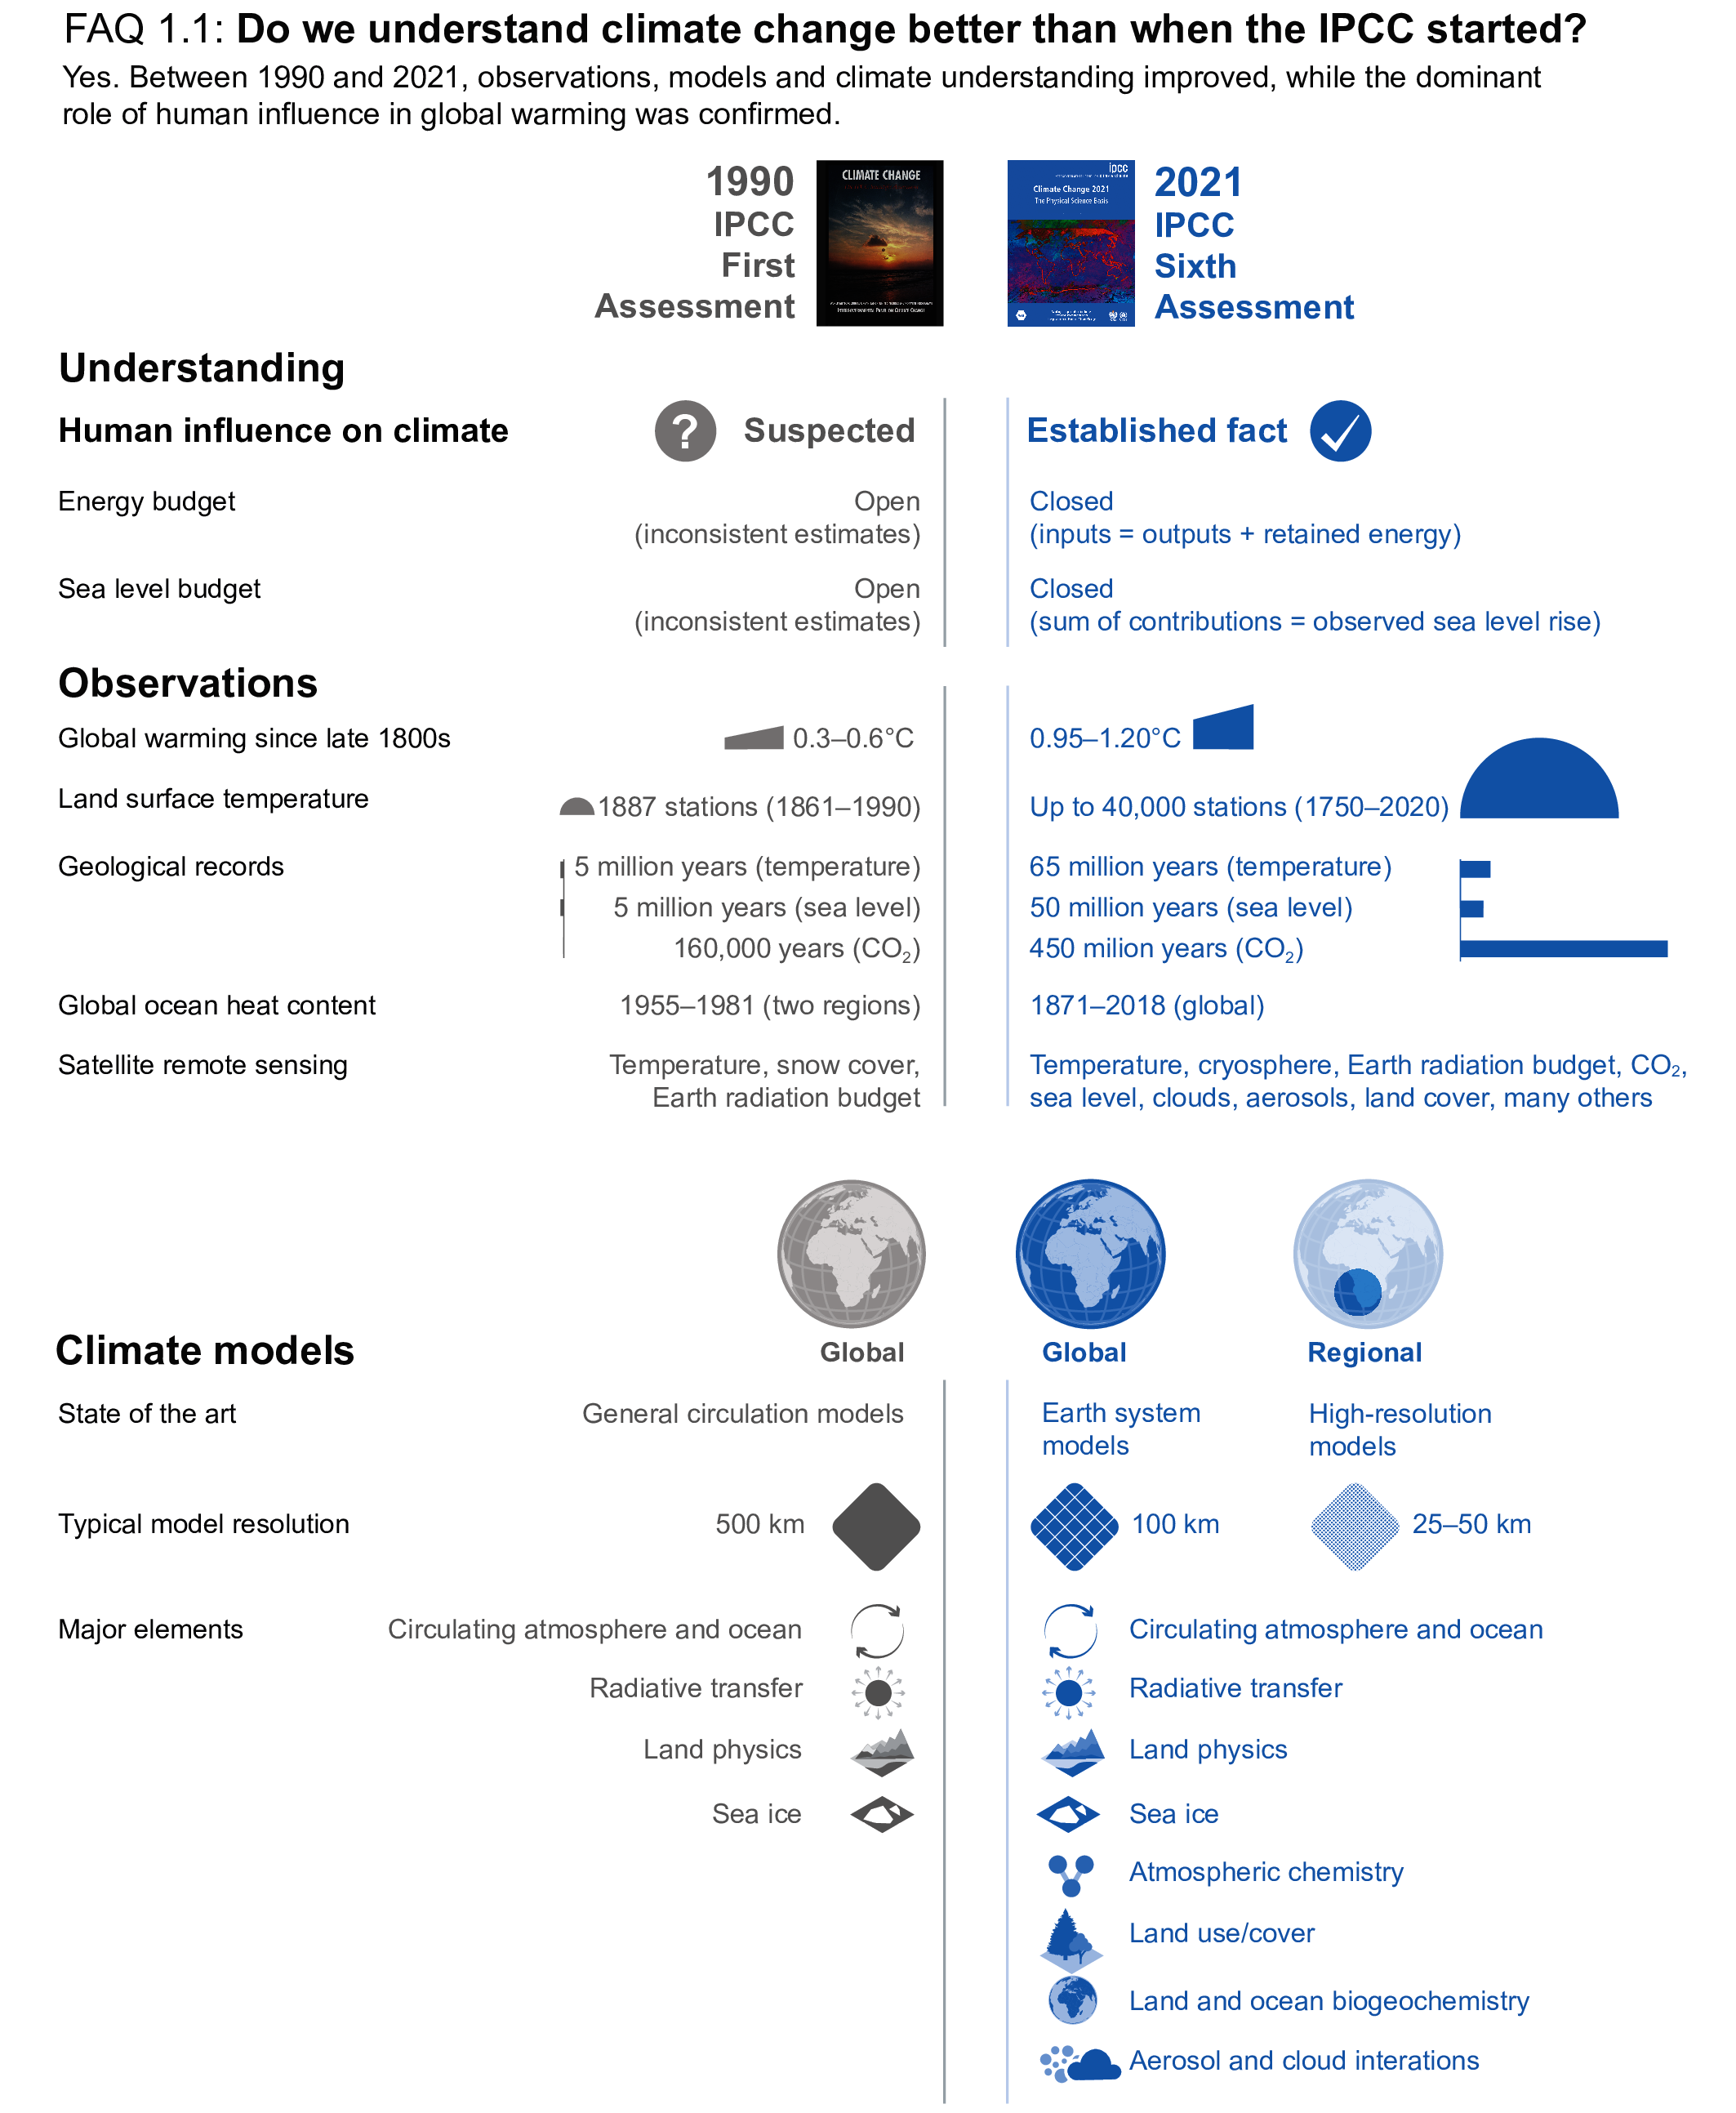 FAQ 1.1, Figure 1 | Sample elements of climate understanding, observations and models as assessed in the IPCC First Assessment Report (1990) and Sixth Assessment Report (2021).